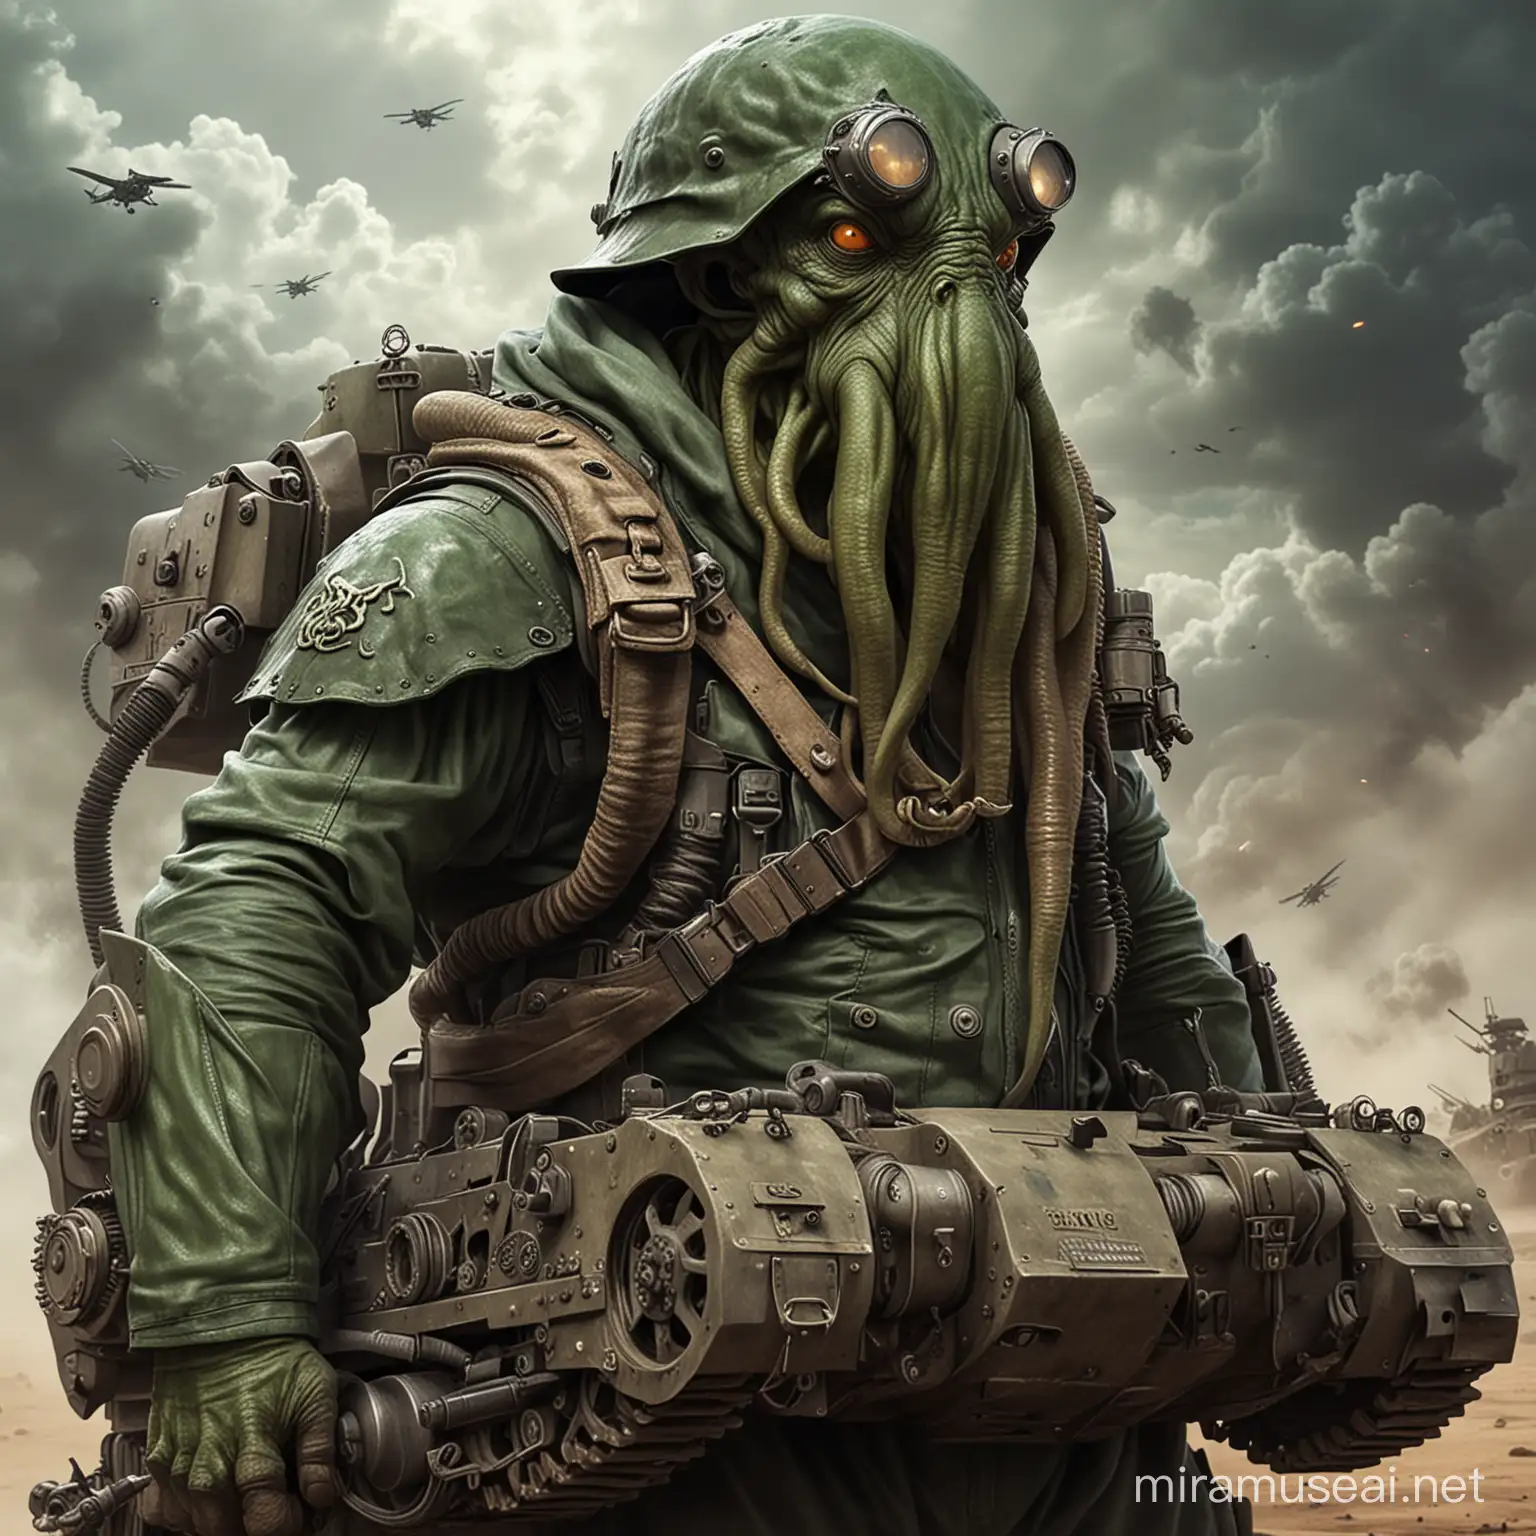 Cthulhu dressed as a tank driver at war